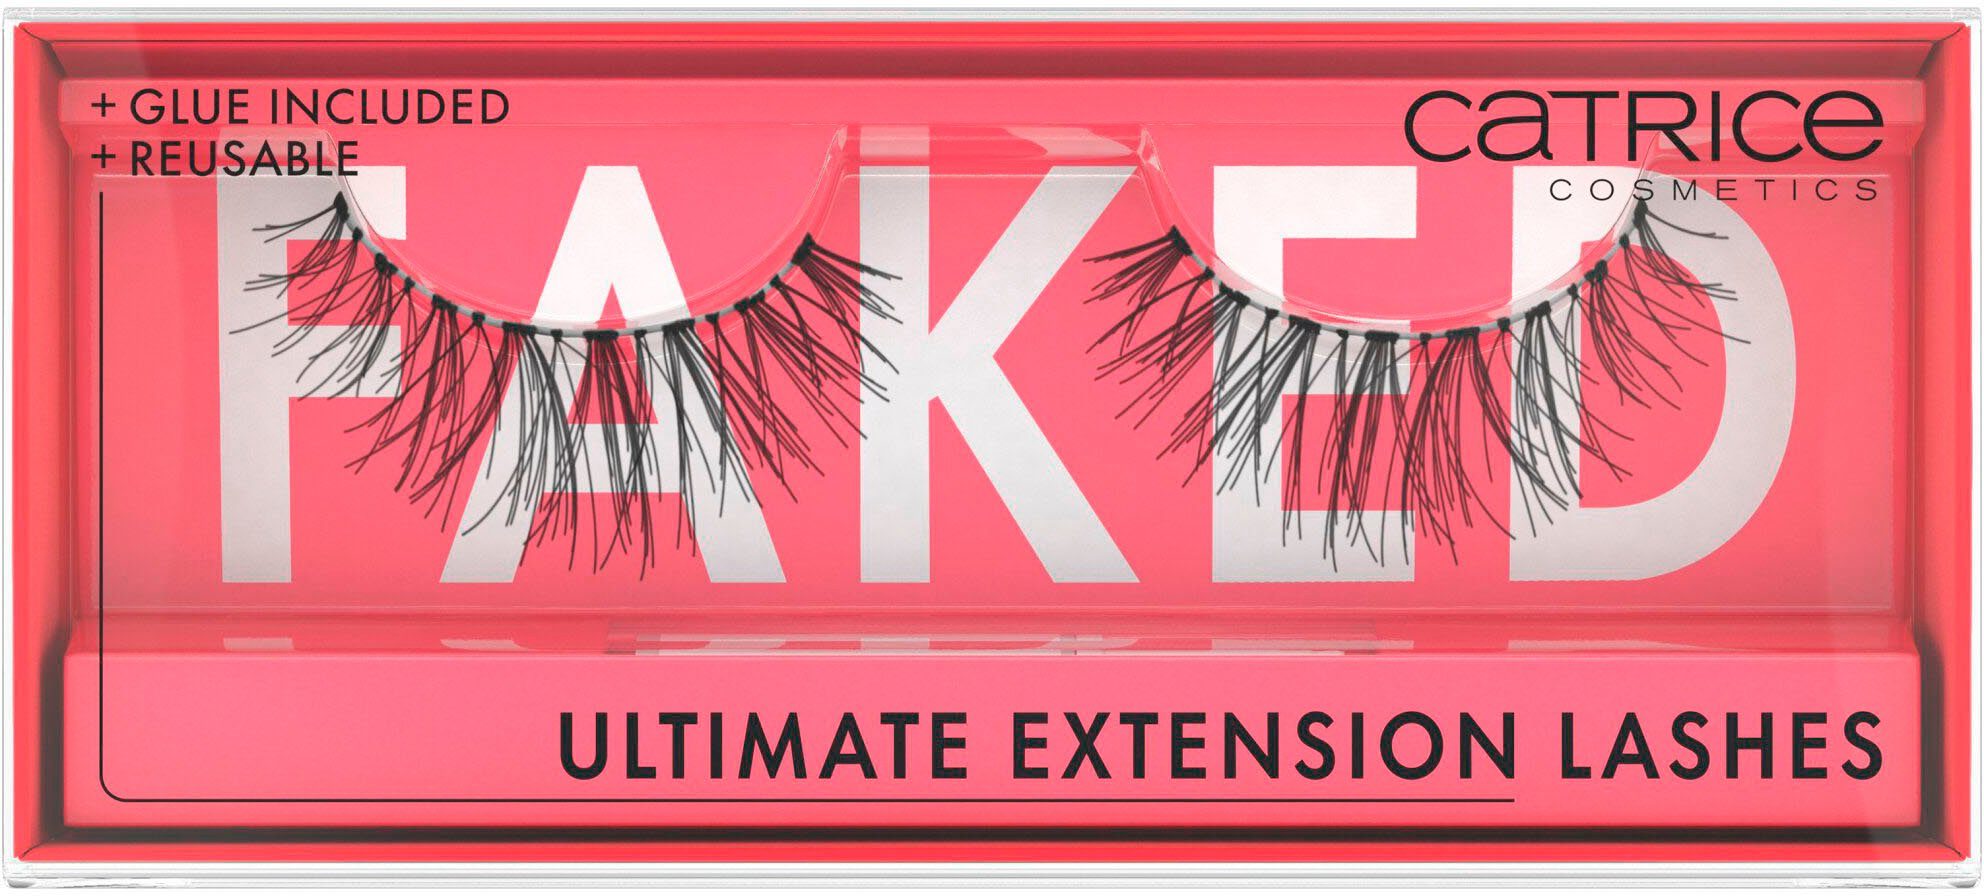 Catrice Bandwimpern Lashes, tlg. Extension Faked Set, 3 Ultimate